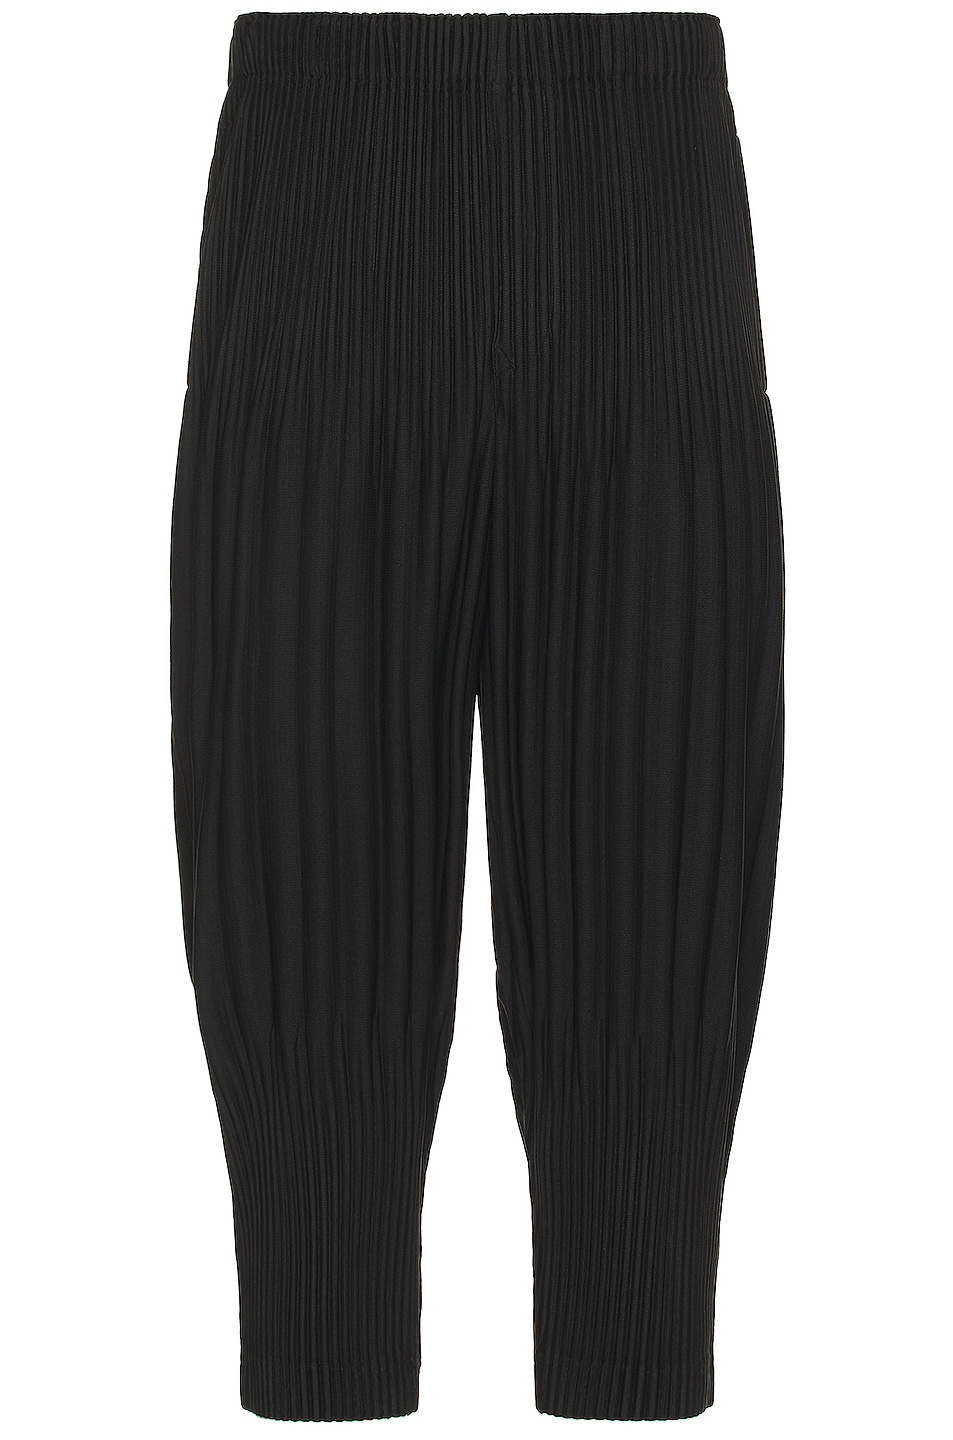 Homme Plisse Issey Miyake Basics Relaxed Pant in Black | FWRD